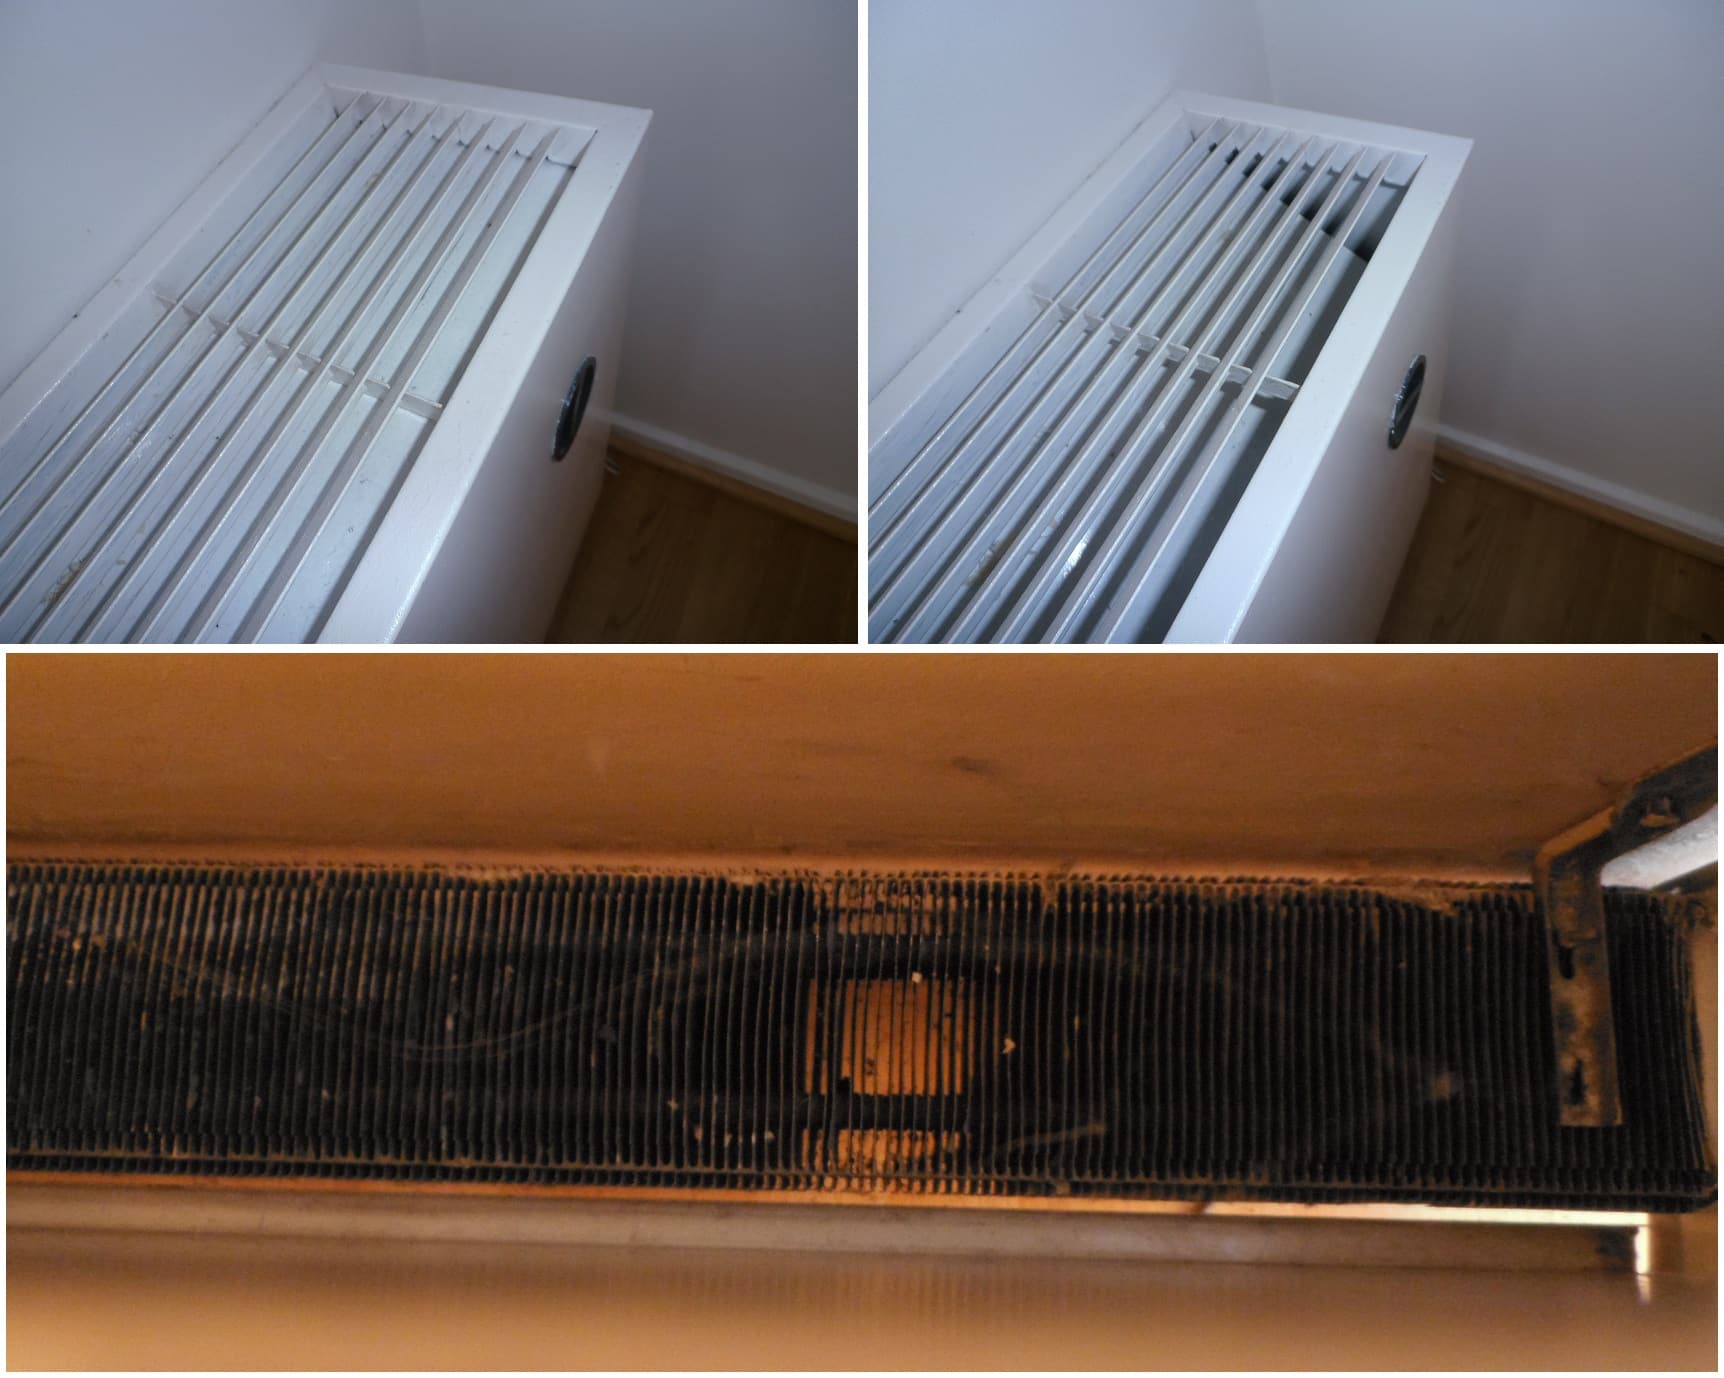 Can You Block A Heater Vent To Redirect Heat? | Qlabe How To Block Heat From Baseboard Heater